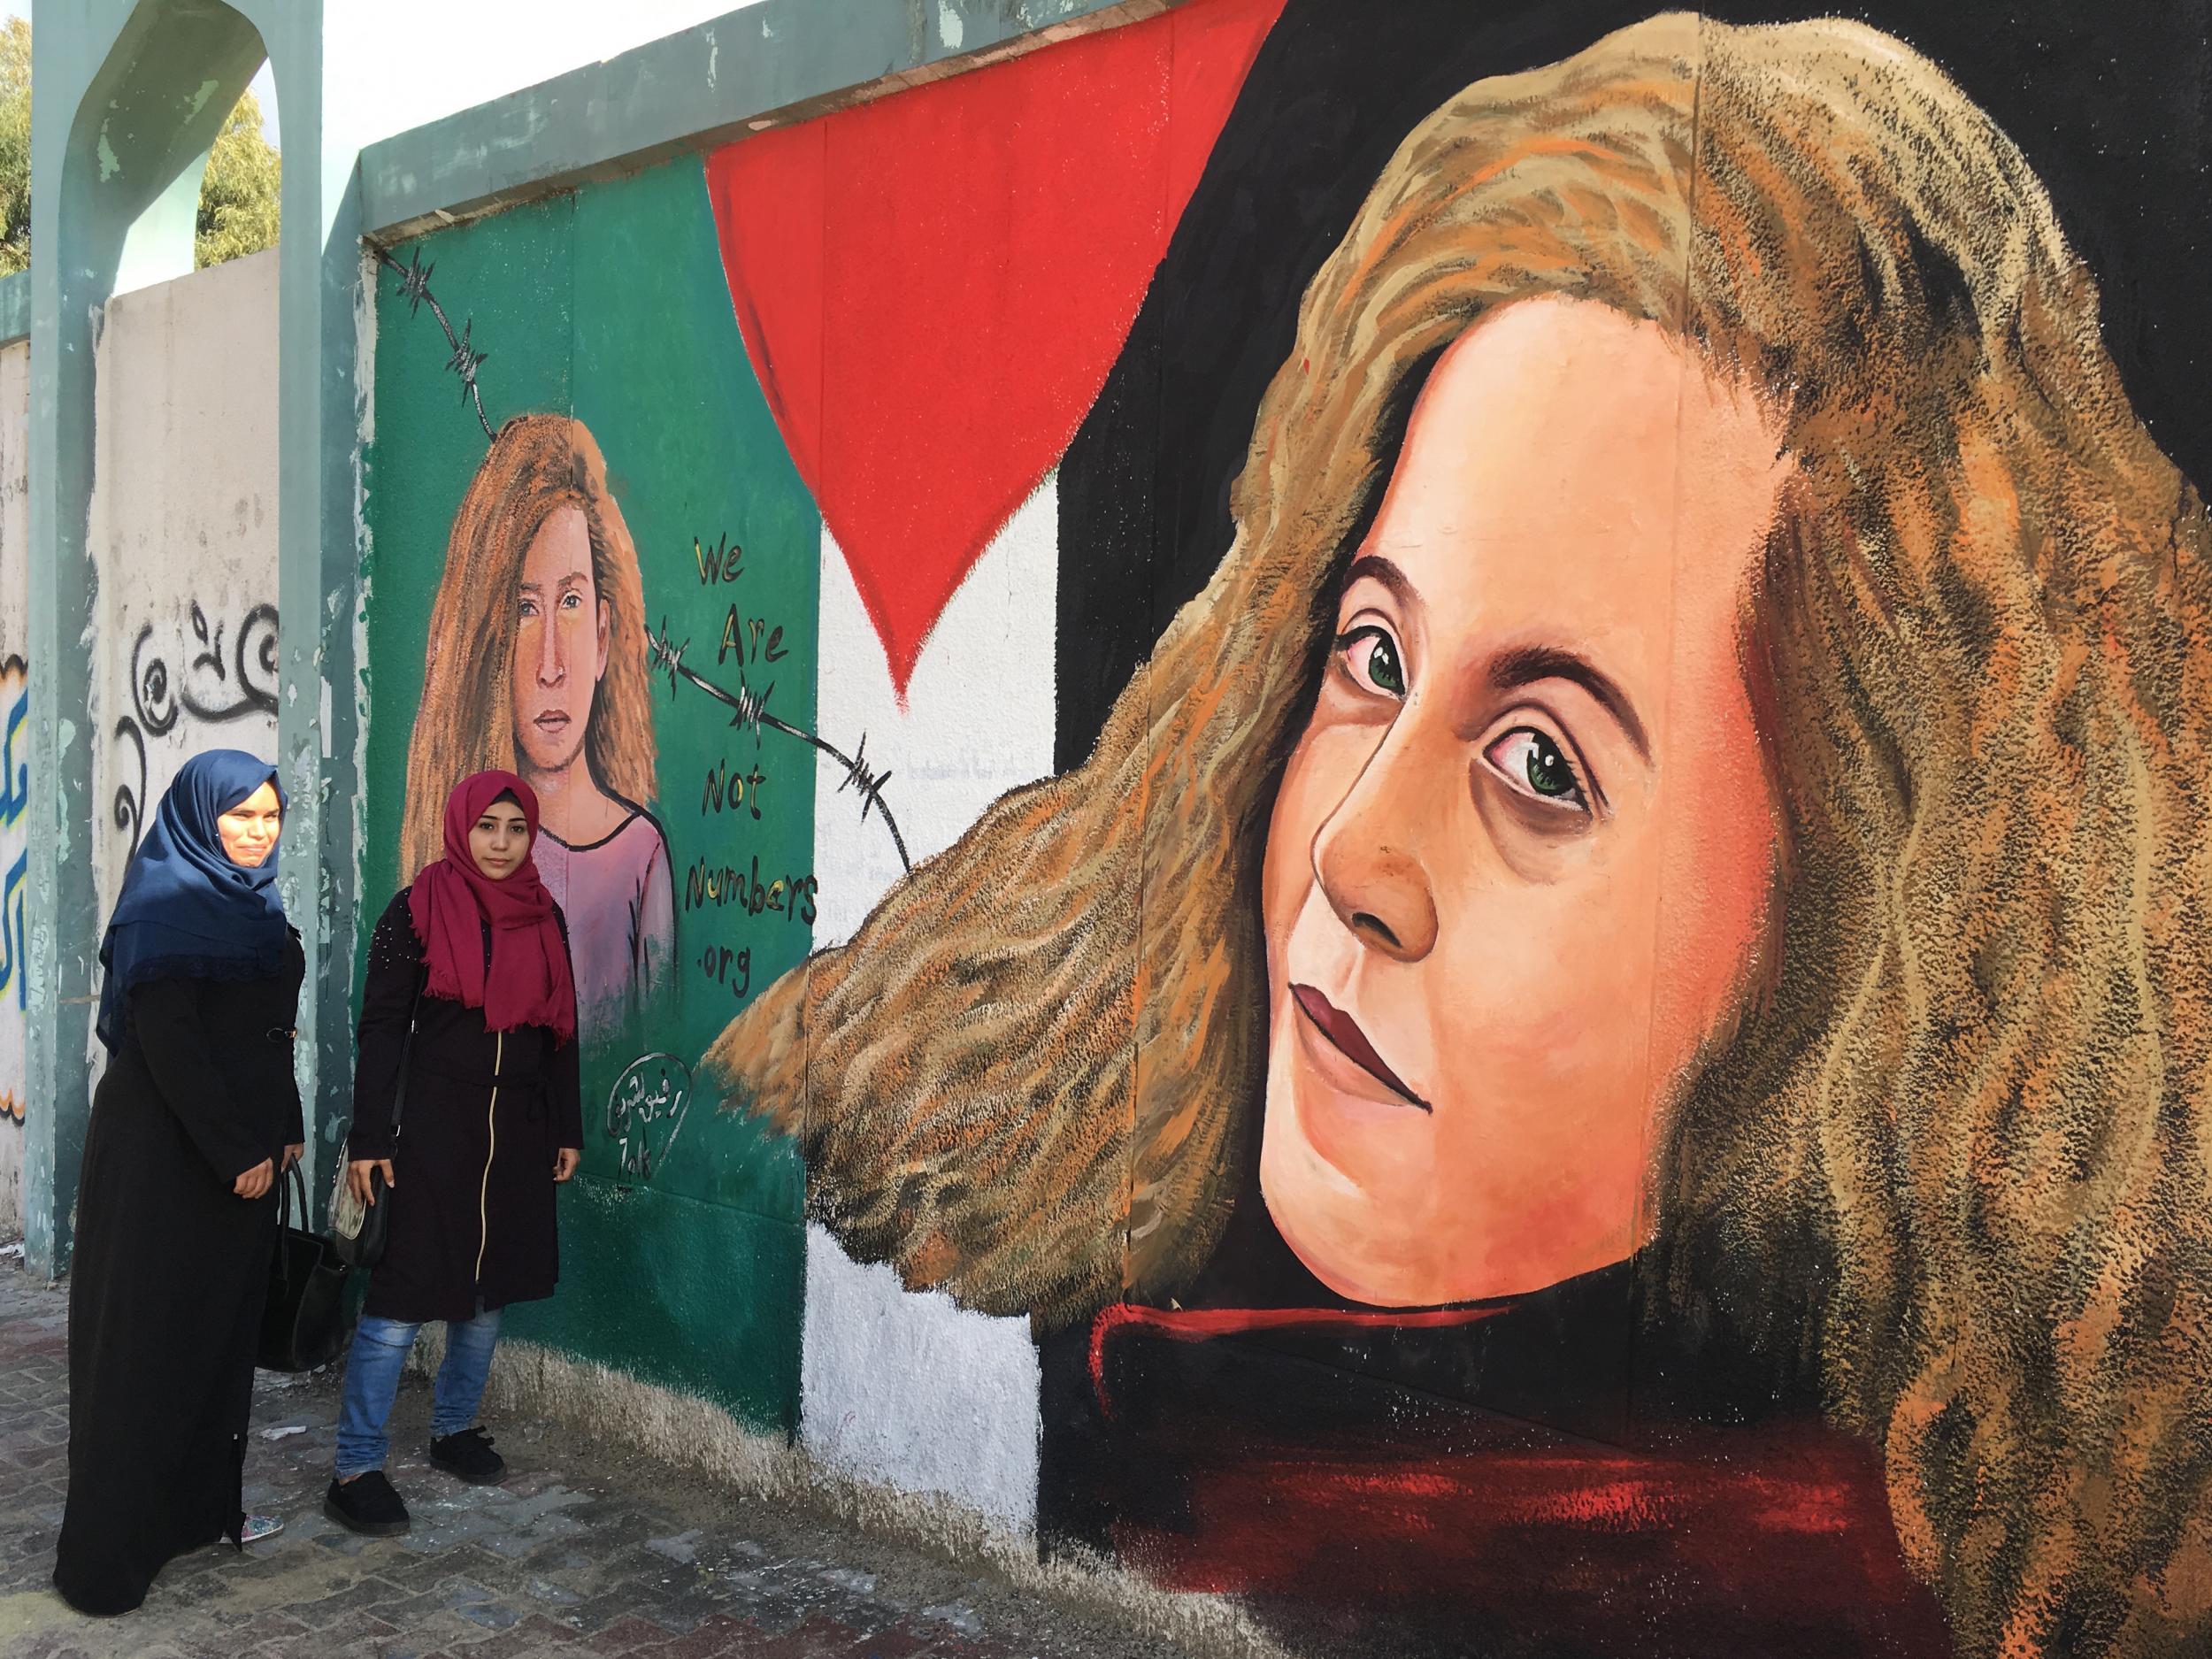 A mural by artist Rafiq al Sharif in Gaza of Palestinian teenager, Ahed Tamimi, who was jailed for slapping a soldier in the West Bank